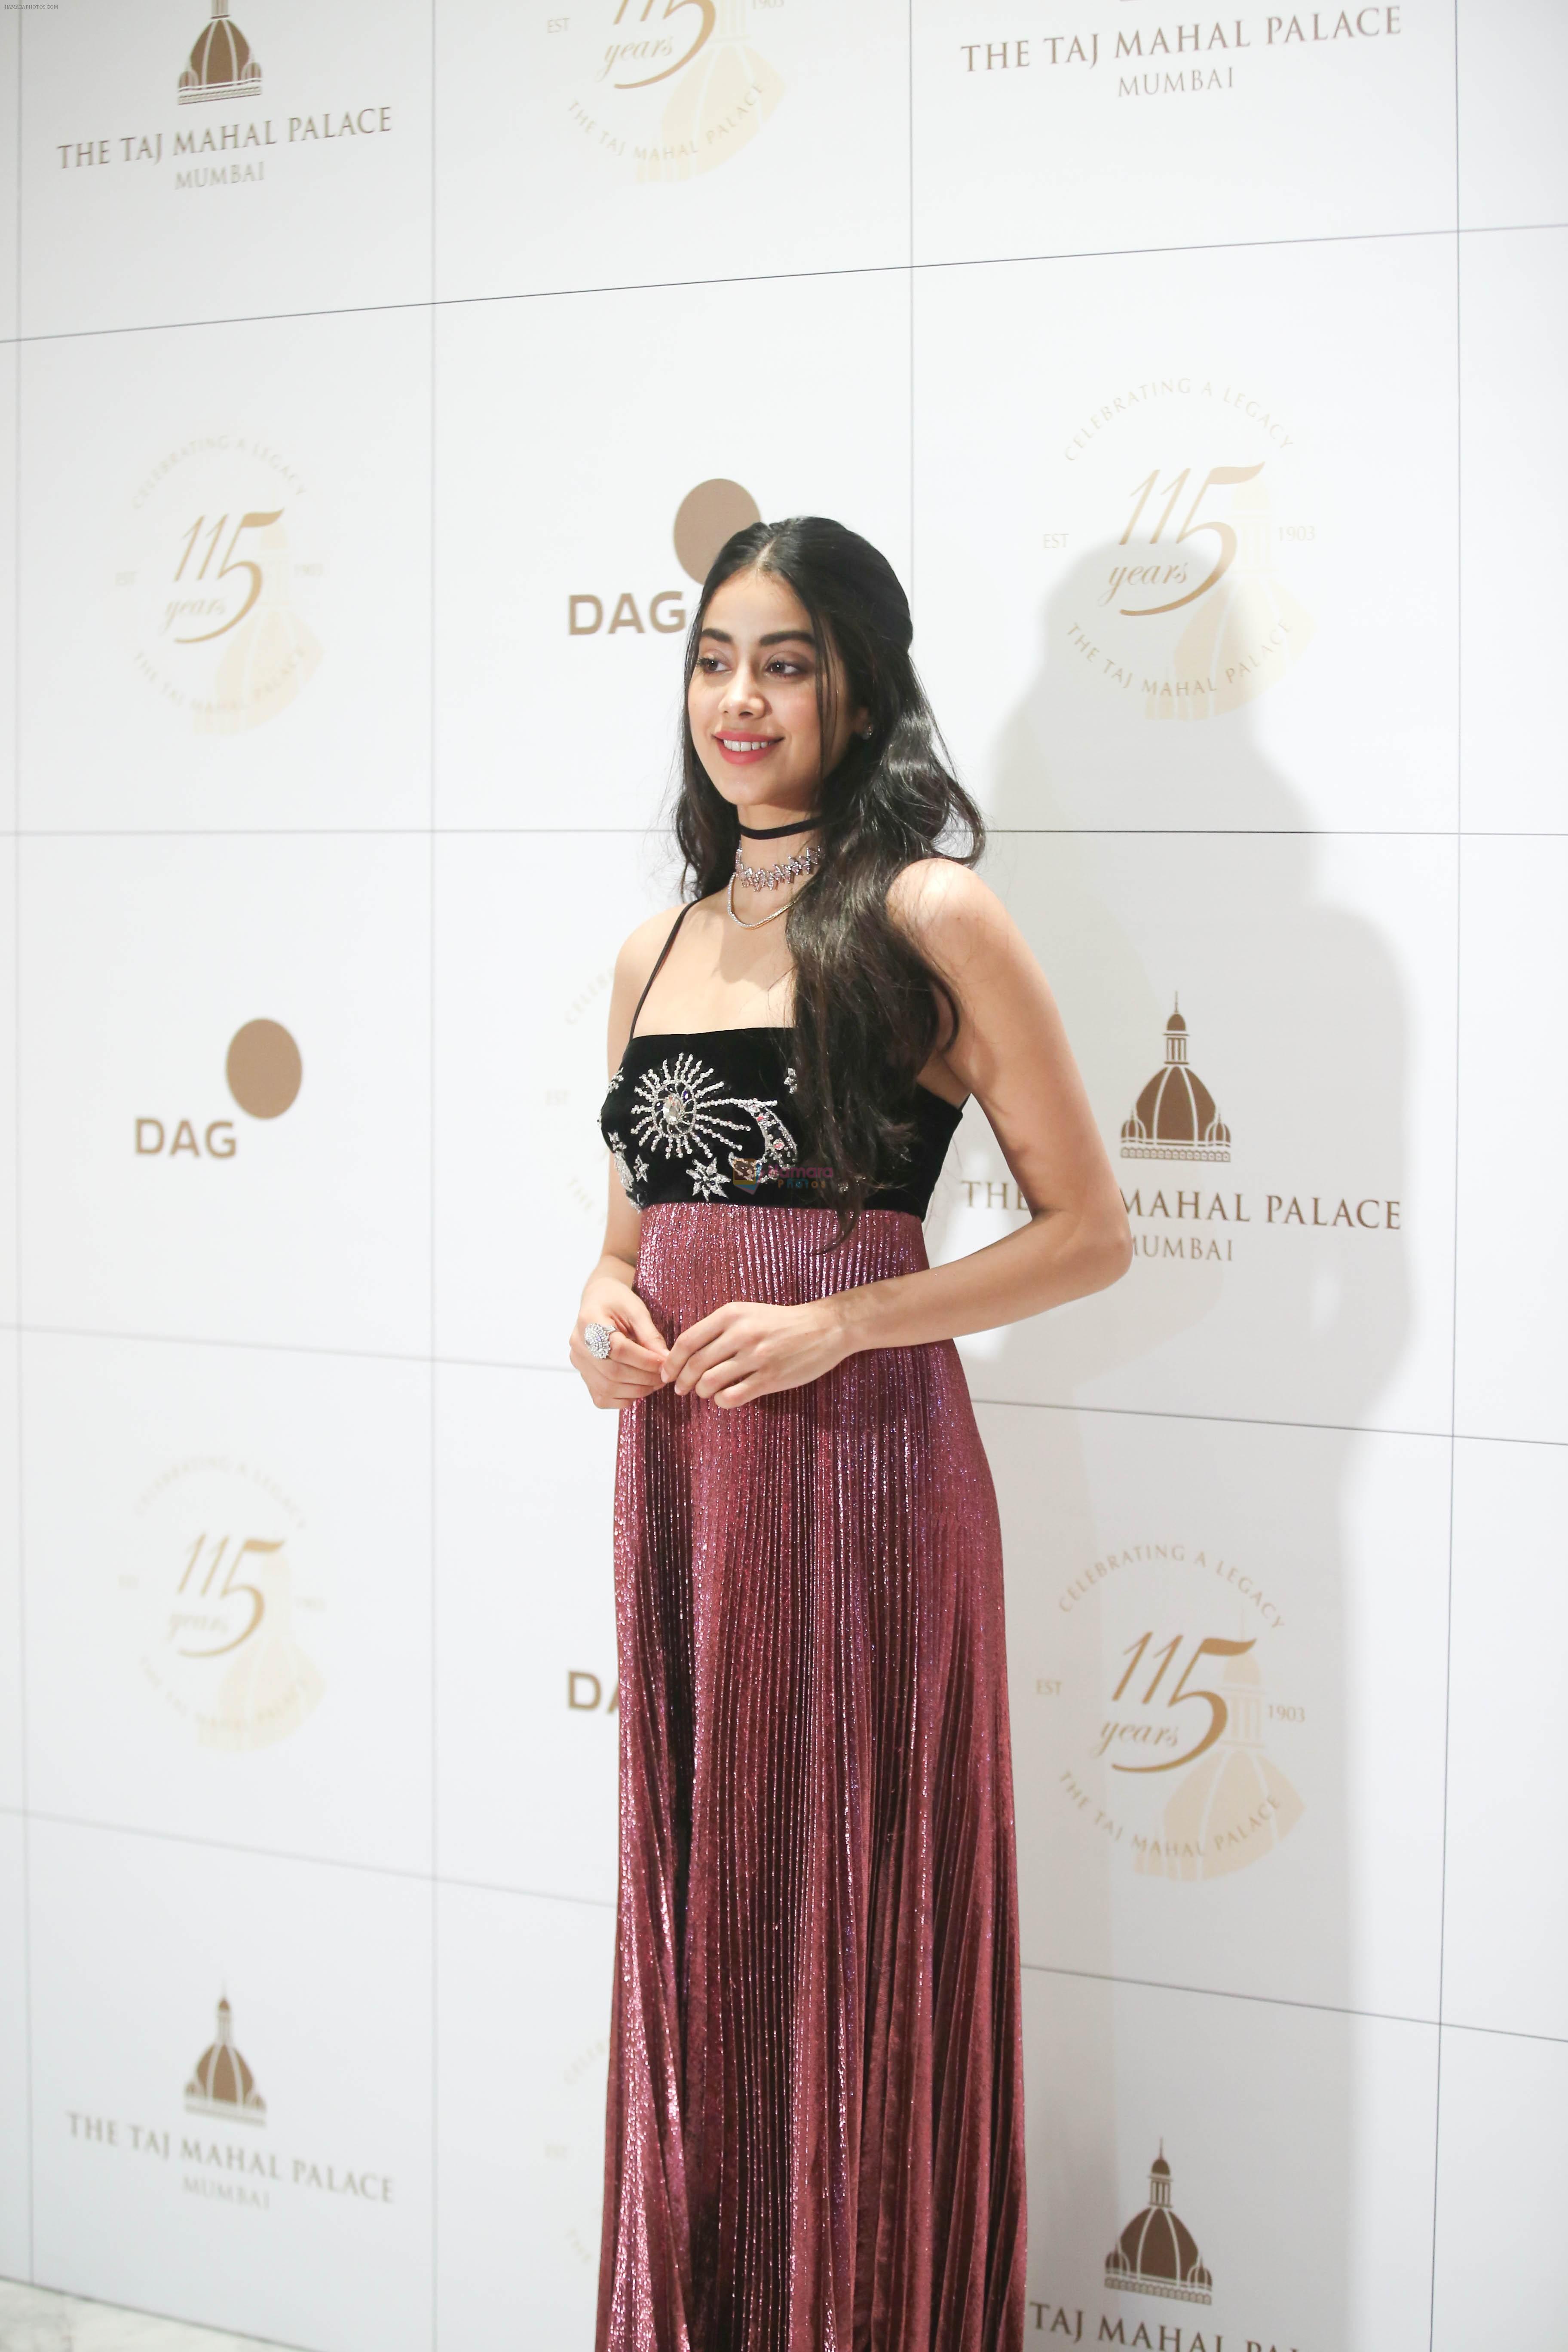 Janhvi Kapoor attends the 115th anniversary celebration of Taj Mahal Palace which was celebrated with A Black Tie Charity Ball in mumbai on 15th Dec 2018